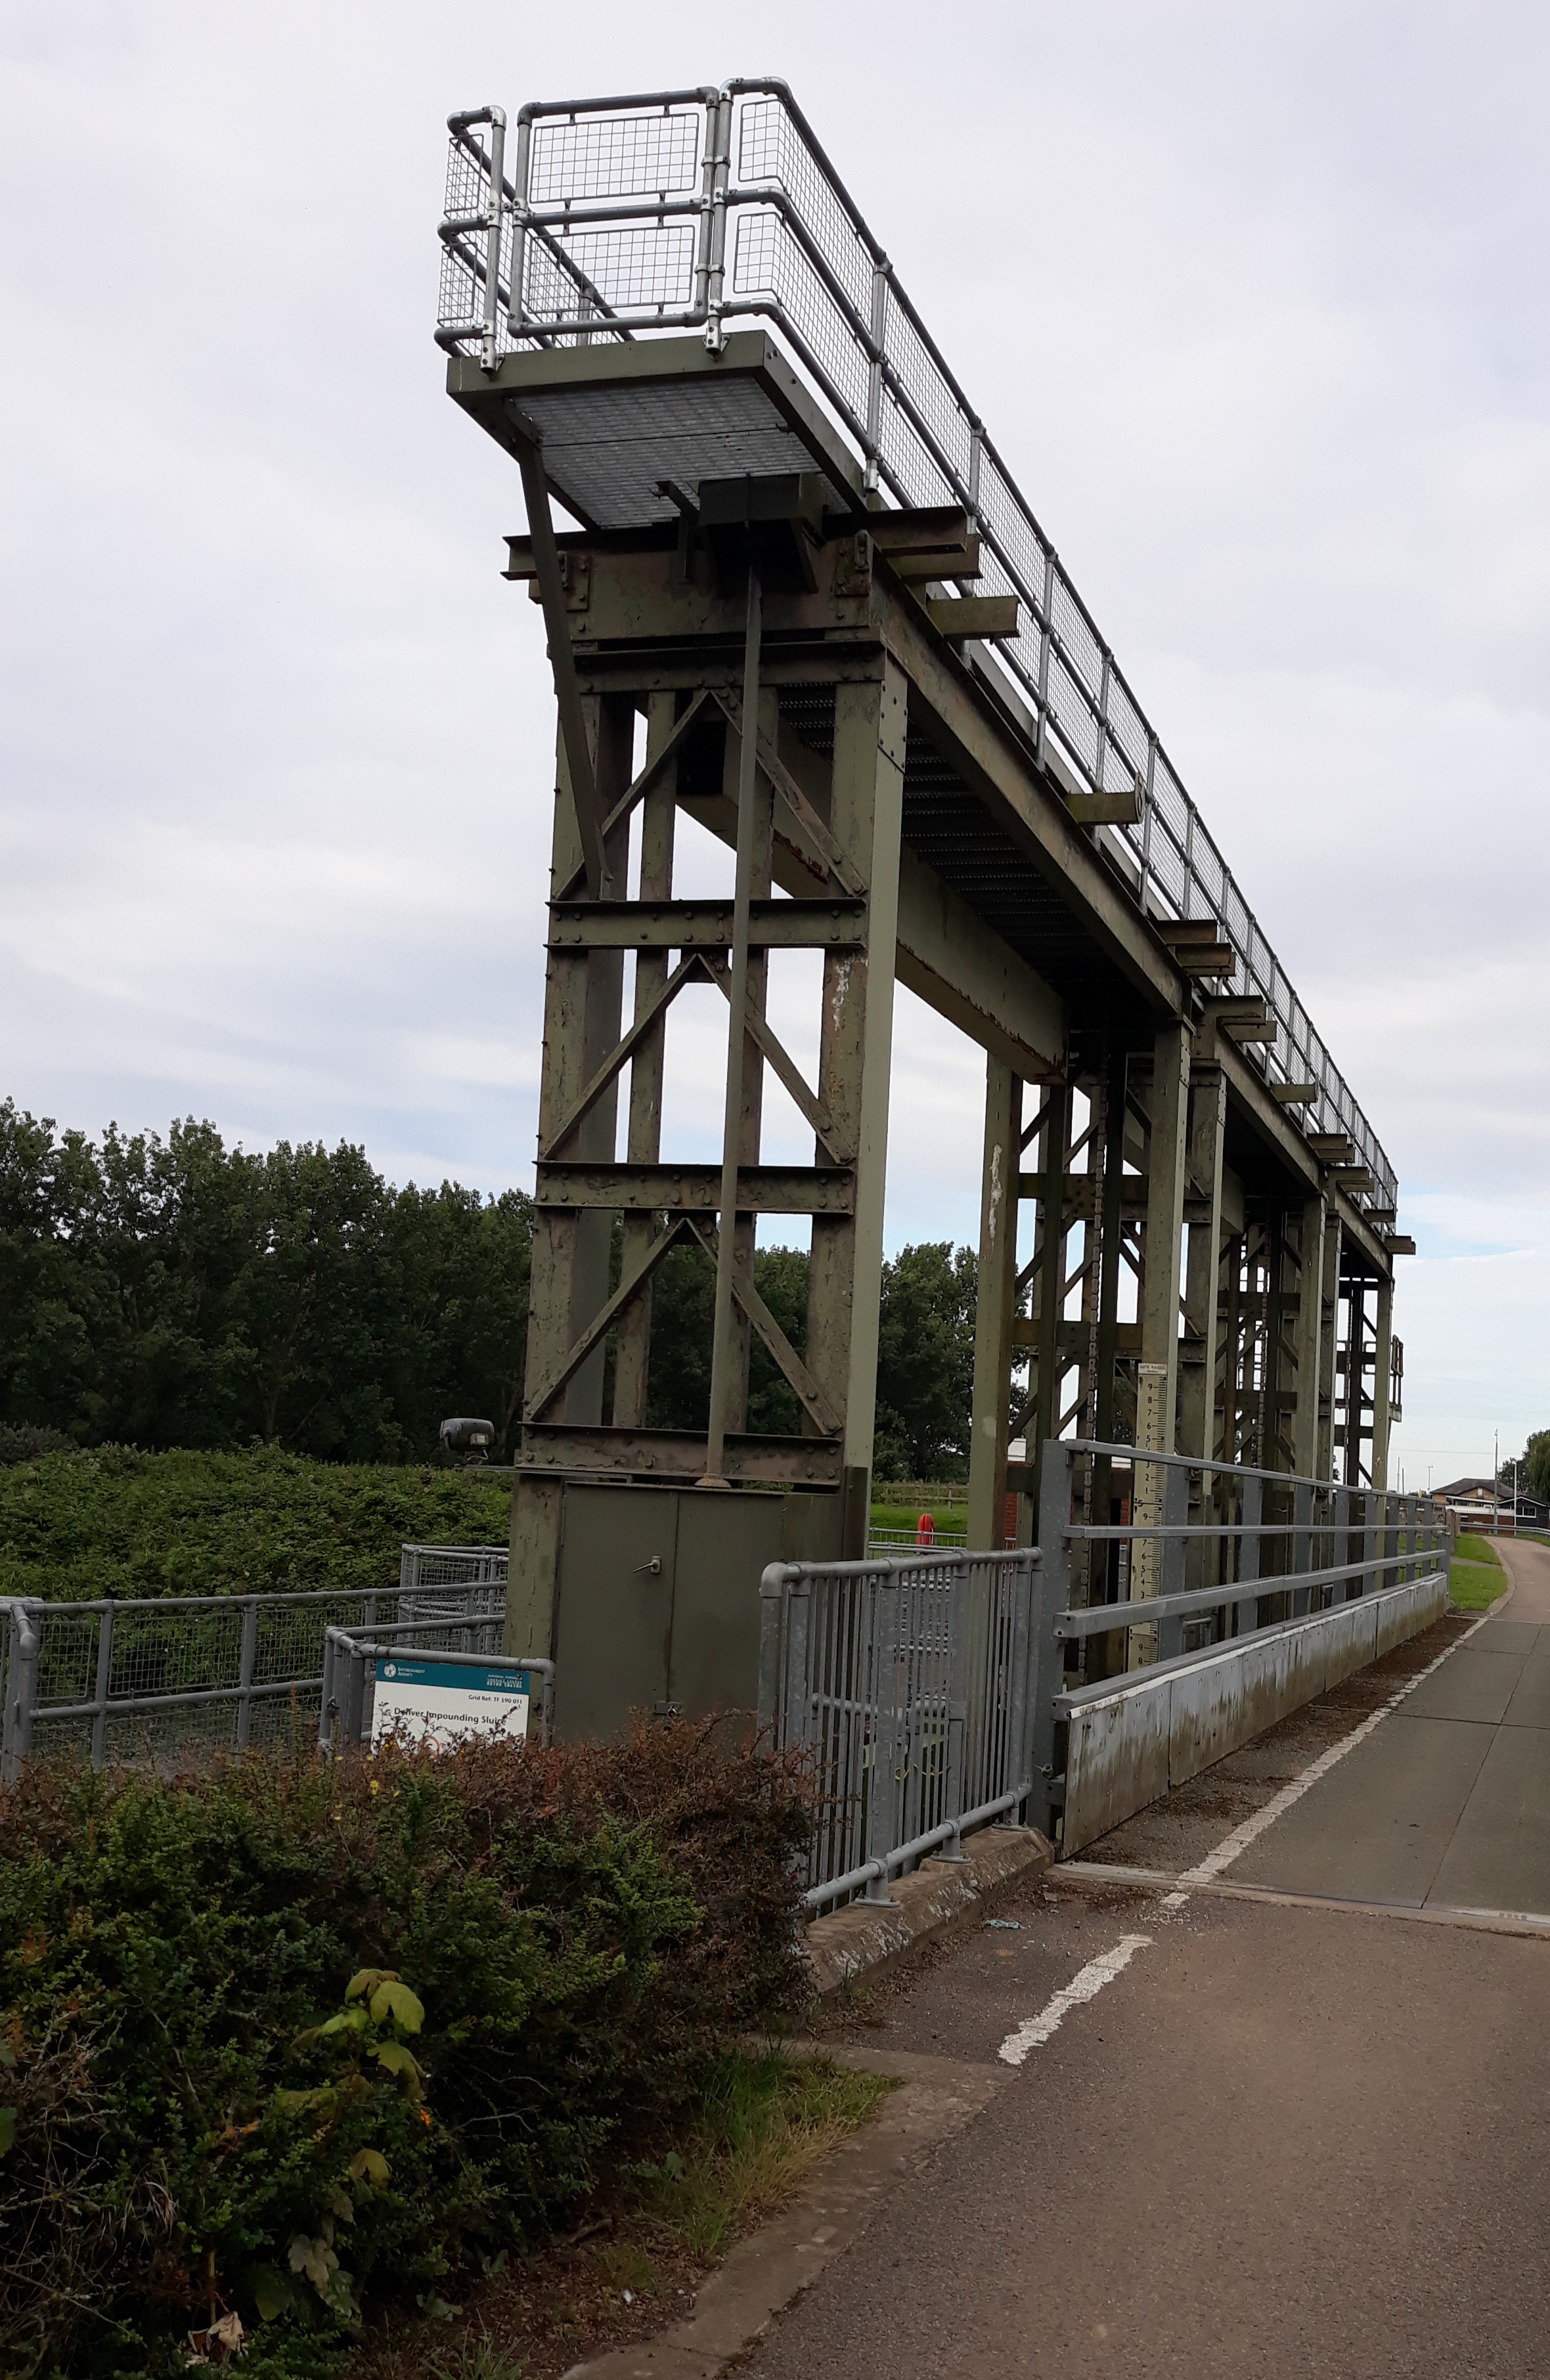 ECS Engineering Services were tasked with surveying existing stop log channels to then design, calculate, fabricate and supply a new set of stop logs, along with the design, calculation, fabrication and installation of new storage racking.